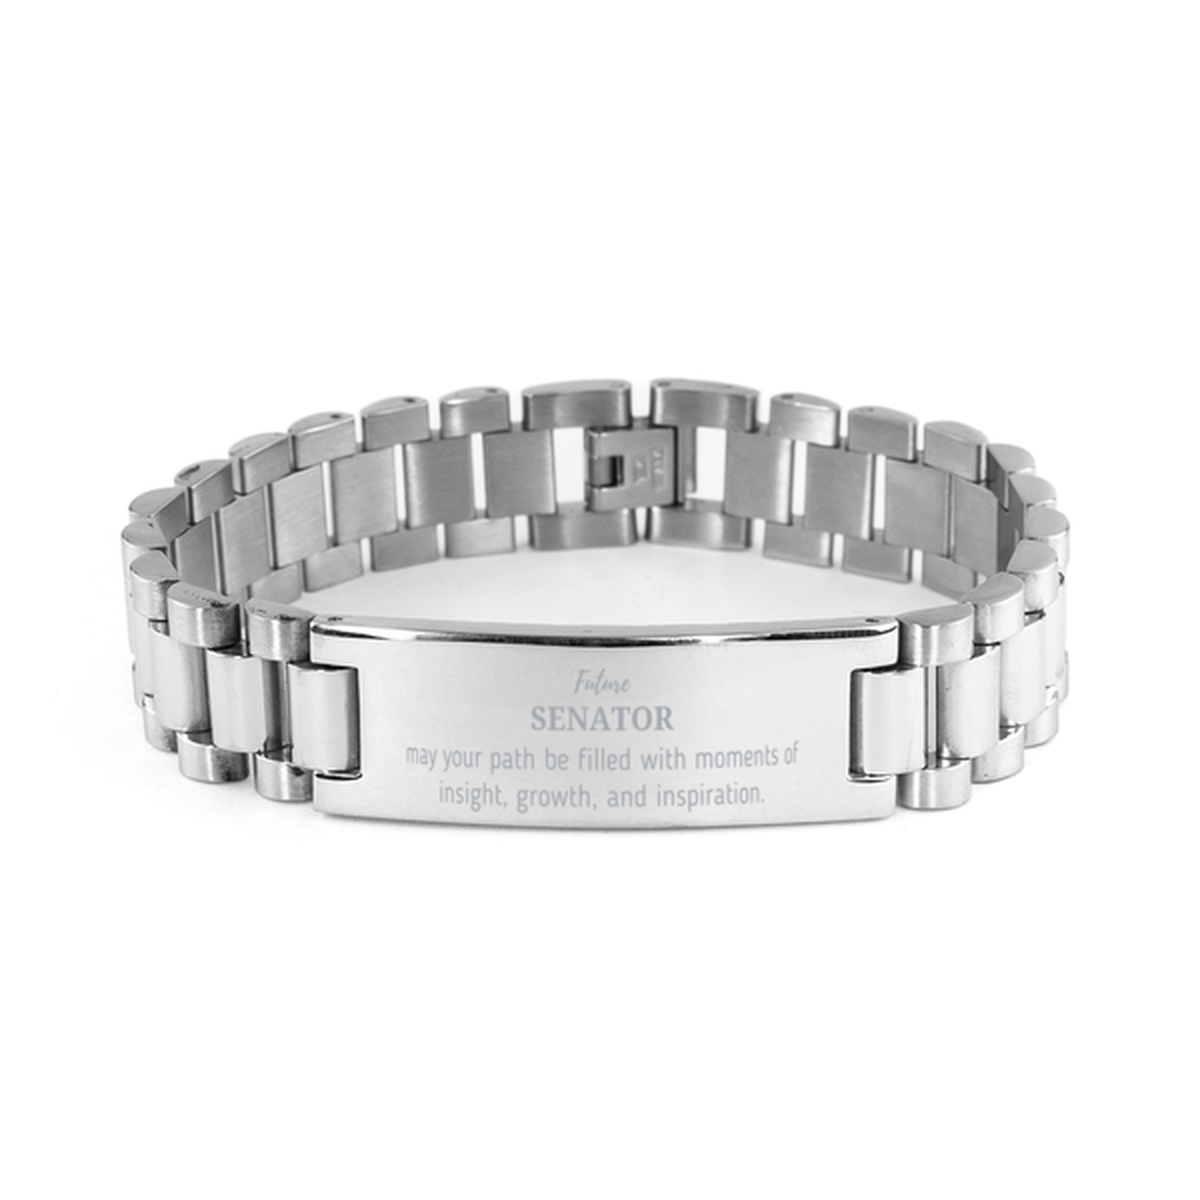 Future Senator Gifts, May your path be filled with moments of insight, Graduation Gifts for New Senator, Christmas Unique Ladder Stainless Steel Bracelet For Men, Women, Friends